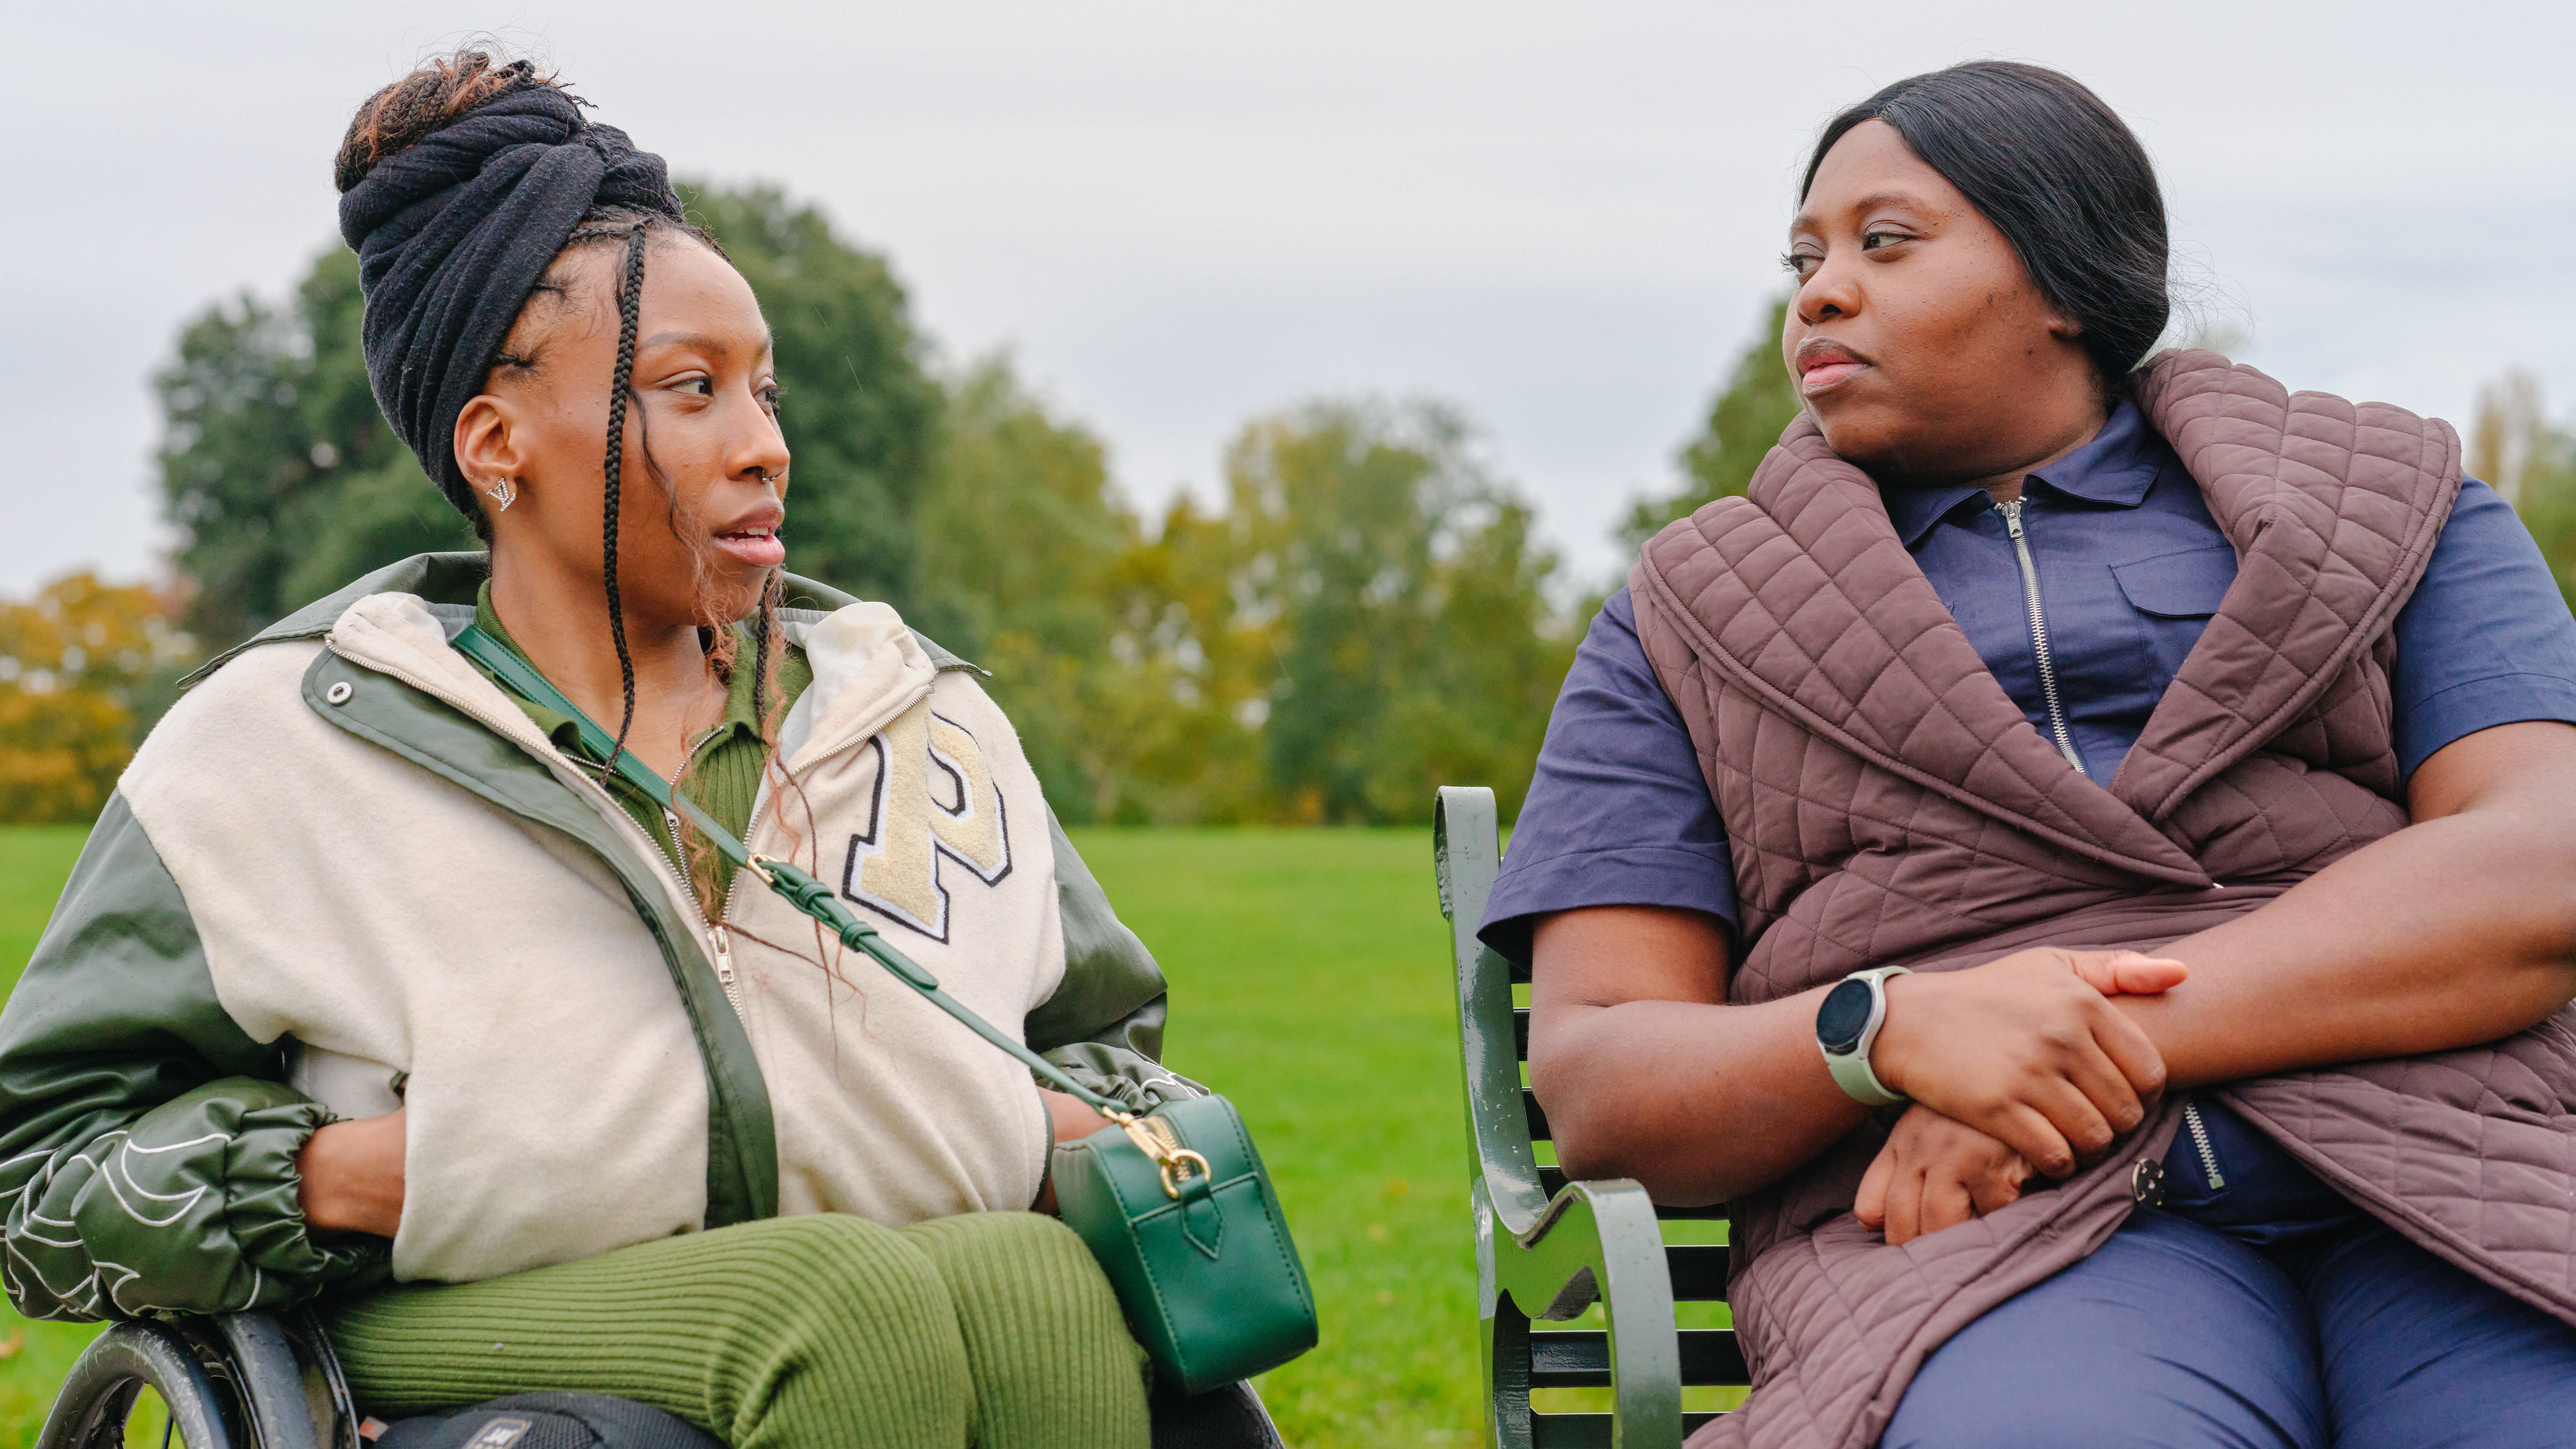 A young Black woman in a wheelchair talking to an older Black woman on a bench in the park.